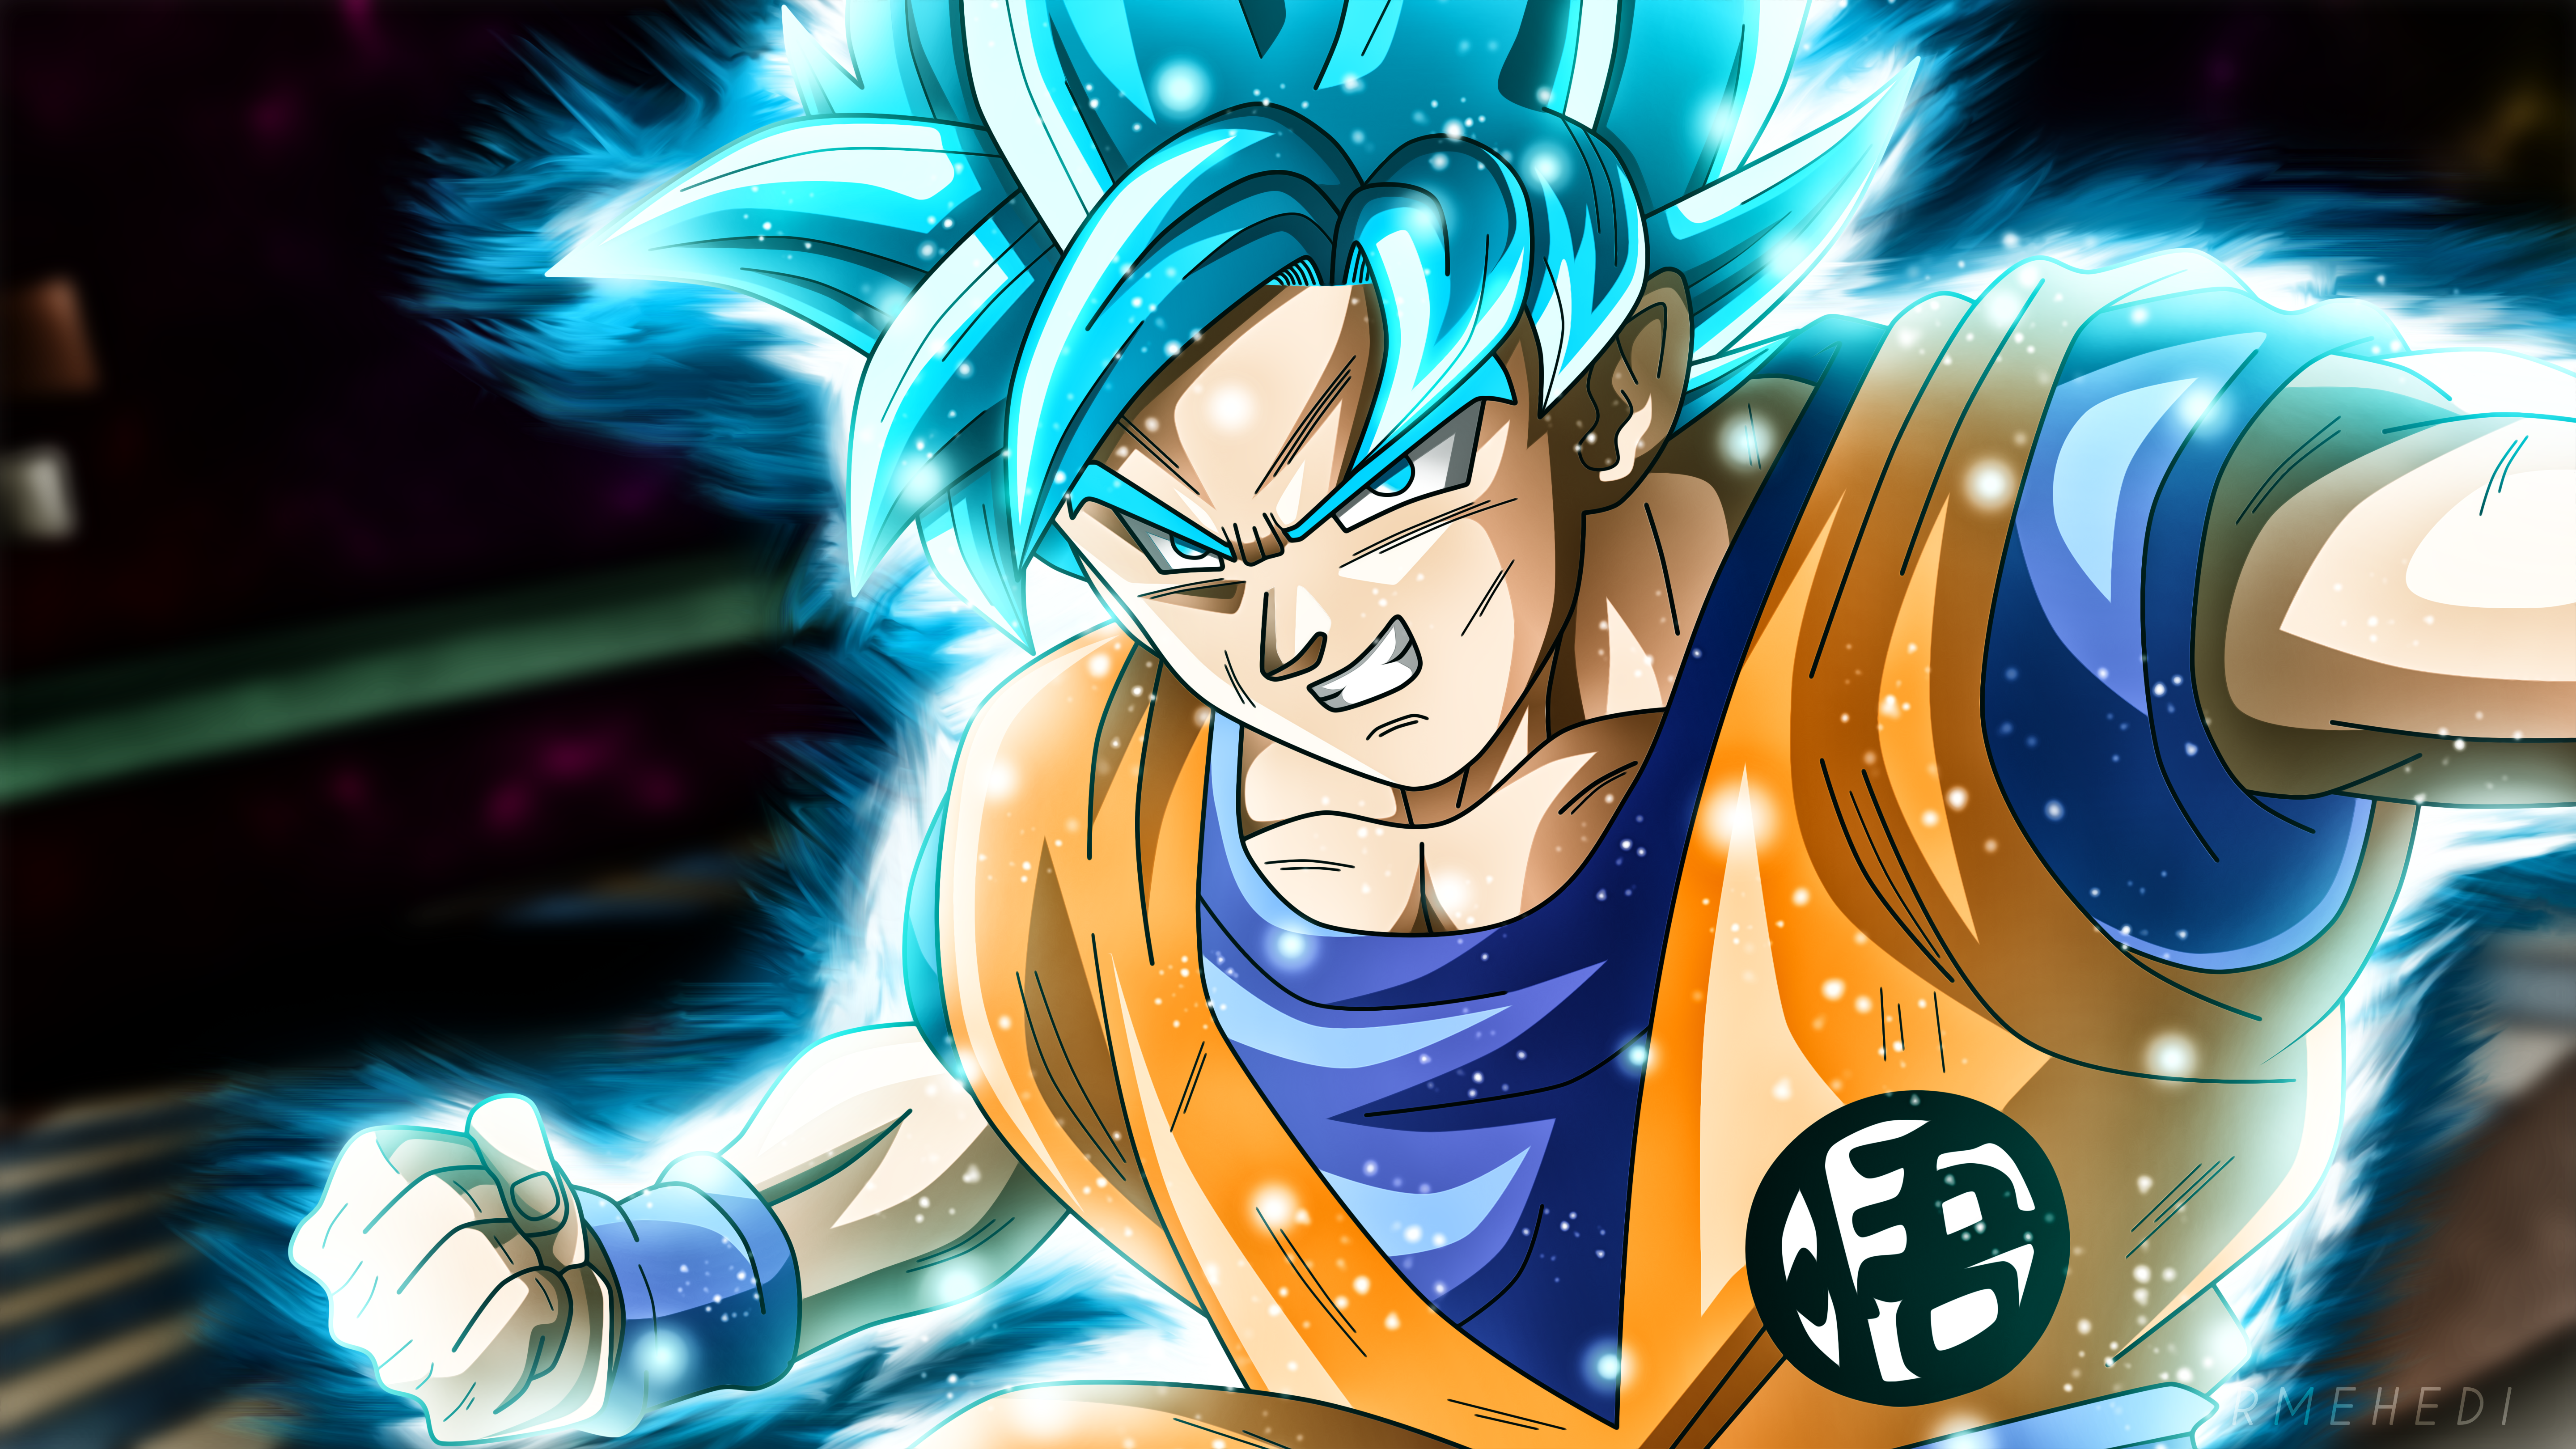 1500+ Dragon Ball Super HD Wallpapers and Backgrounds